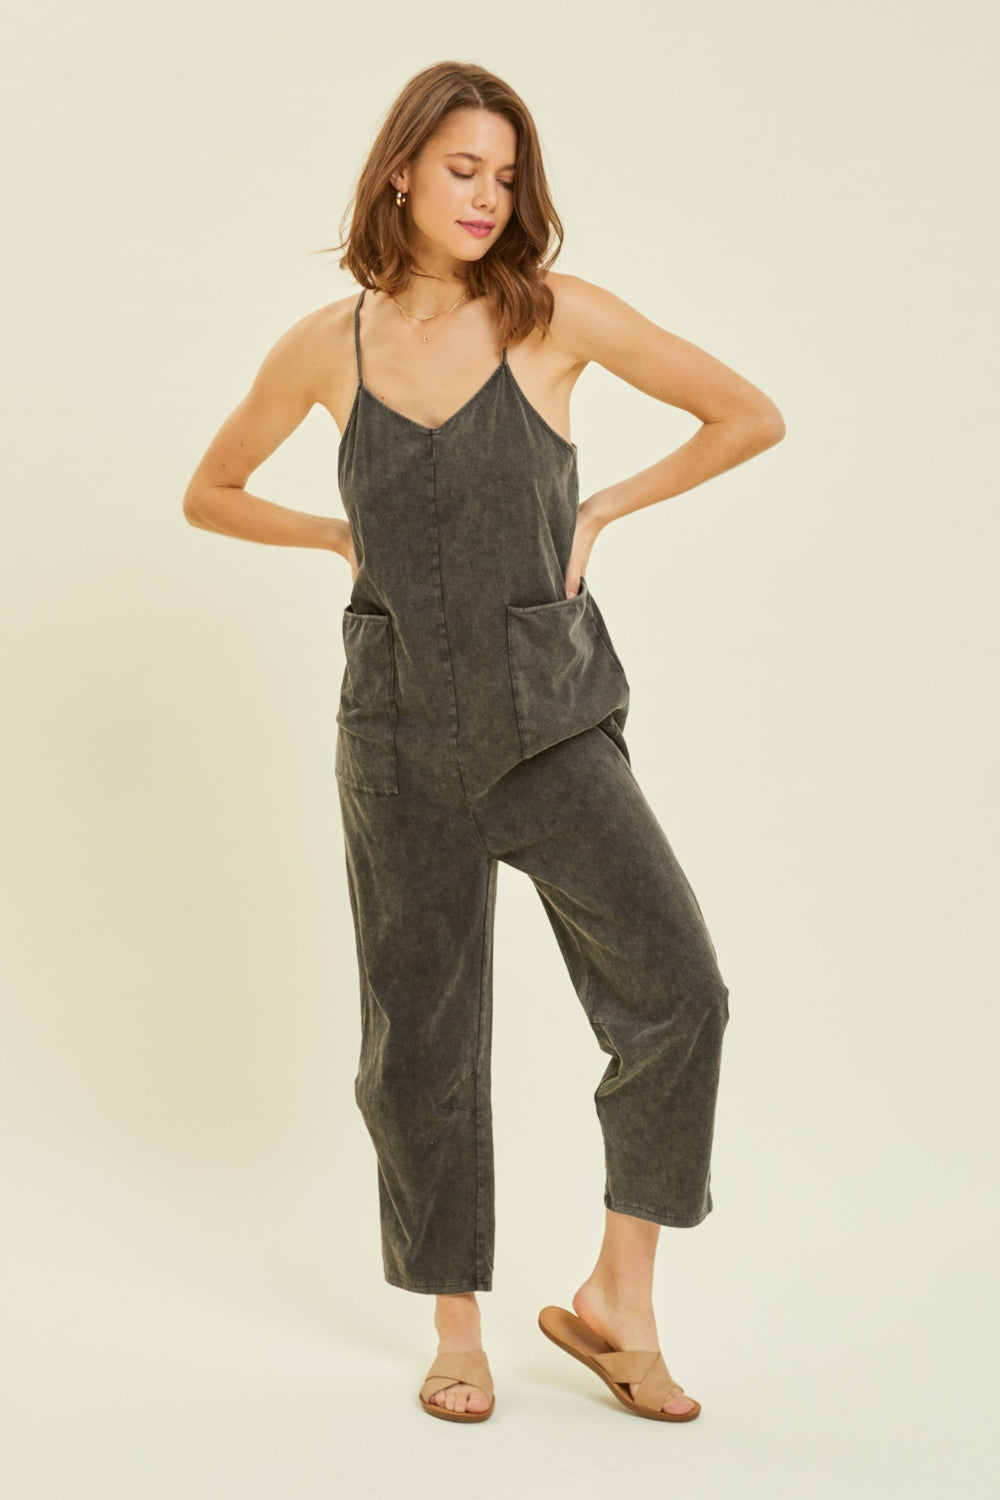 Women's Full Size Mineral-Washed Oversized Jumpsuit with Pockets | Jumpsuits | Ro + Ivy